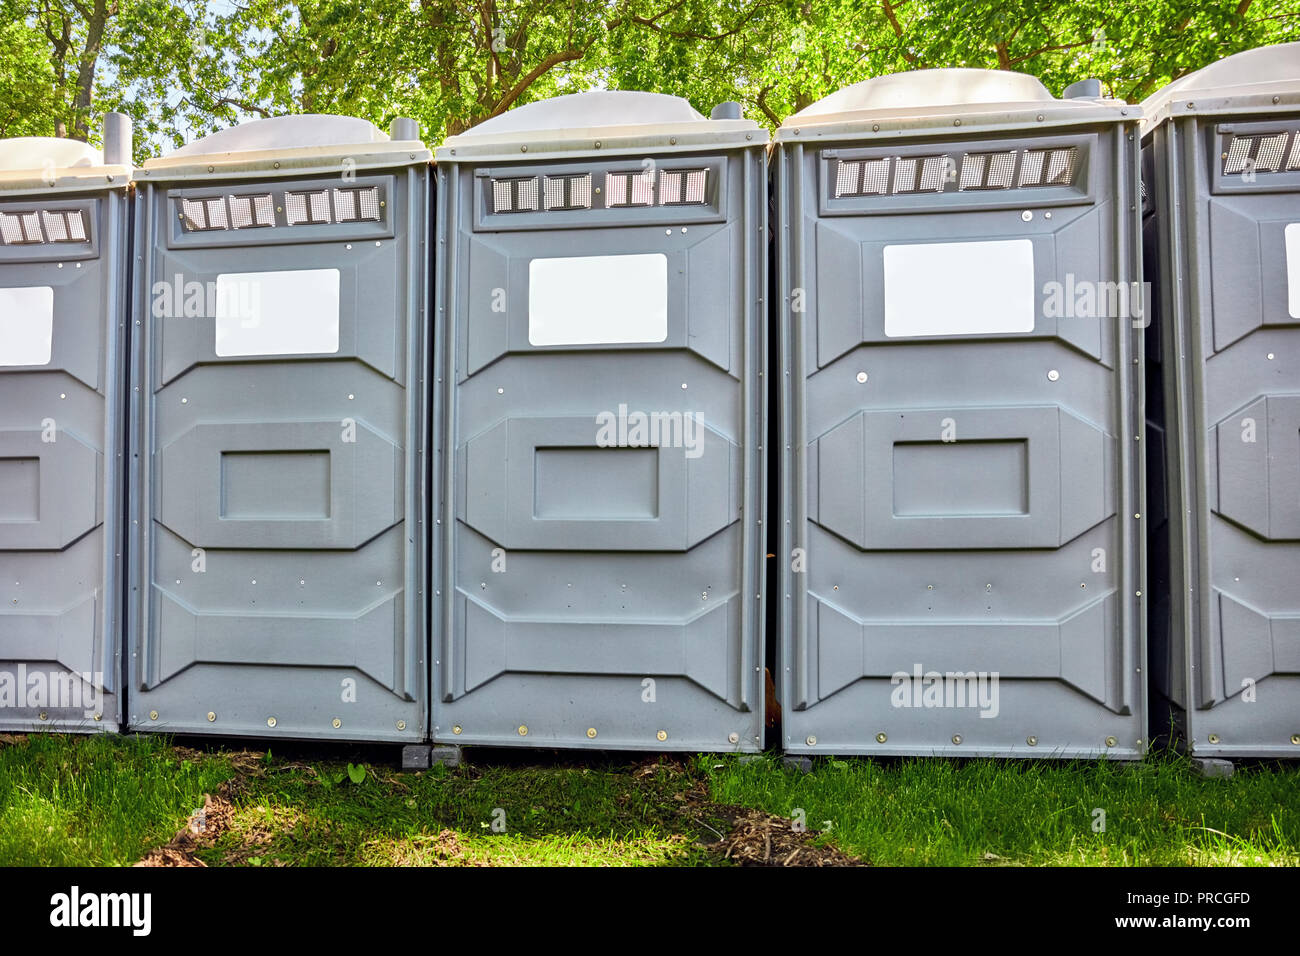 Rows of fiberglass reinforced polymer mobile toilet cabins in a park Stock Photo